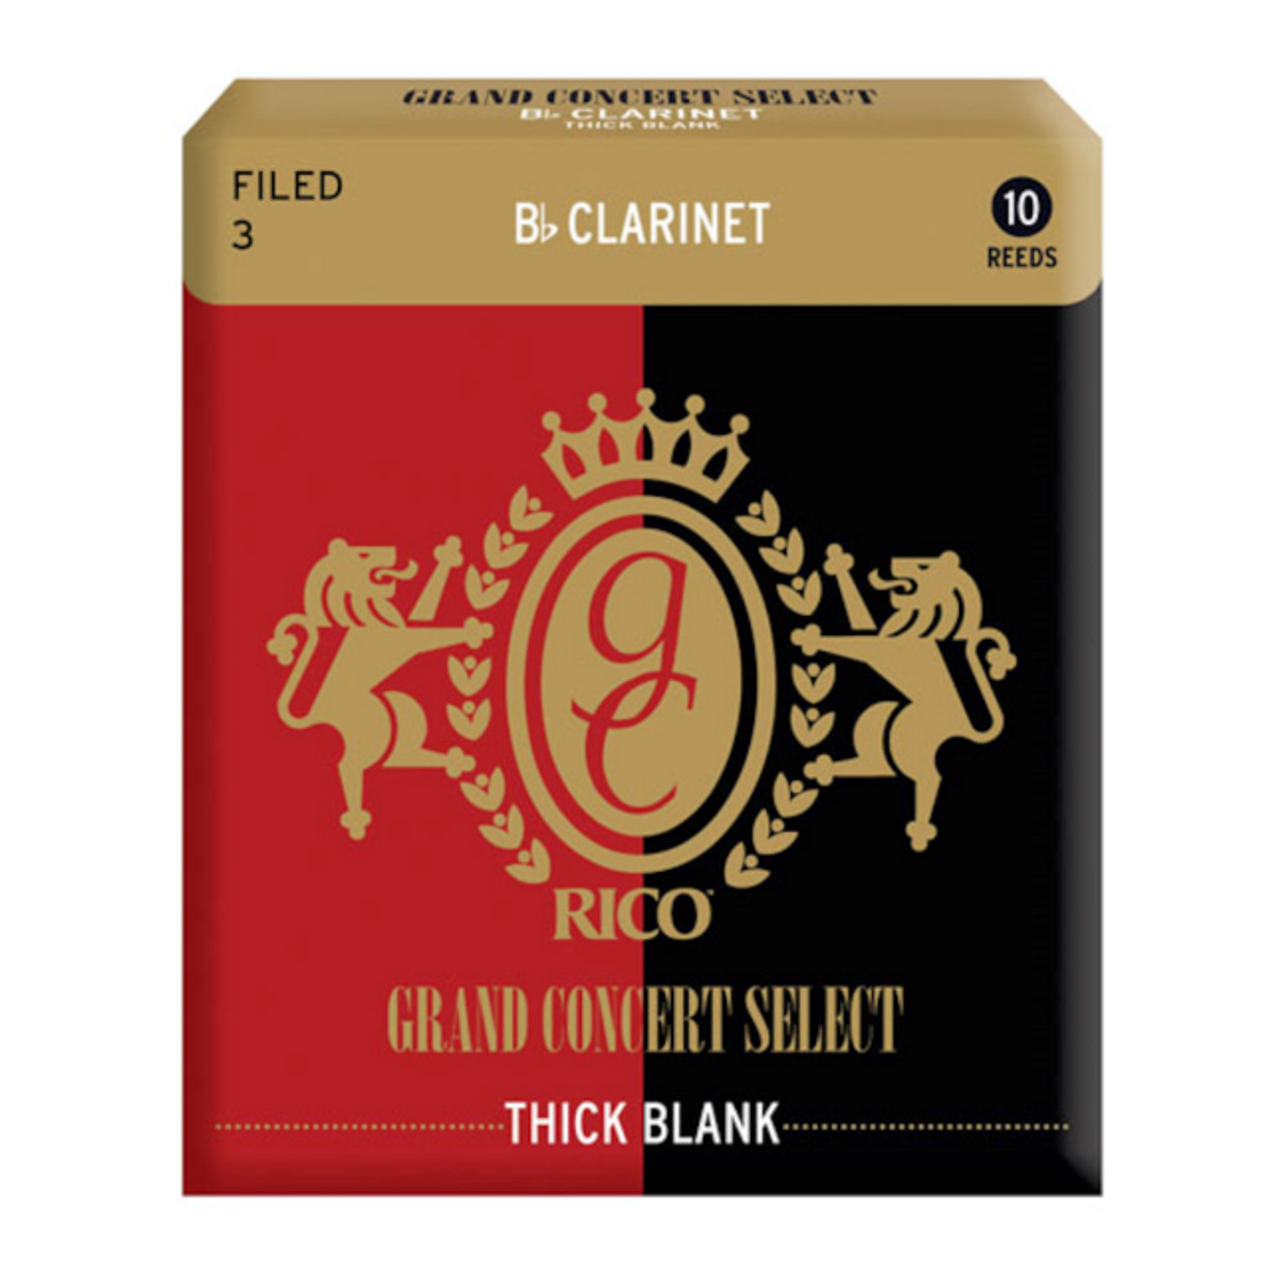 Rico Grand Concert Select Thick Blank Bb Clarinet Reeds, 10-pack